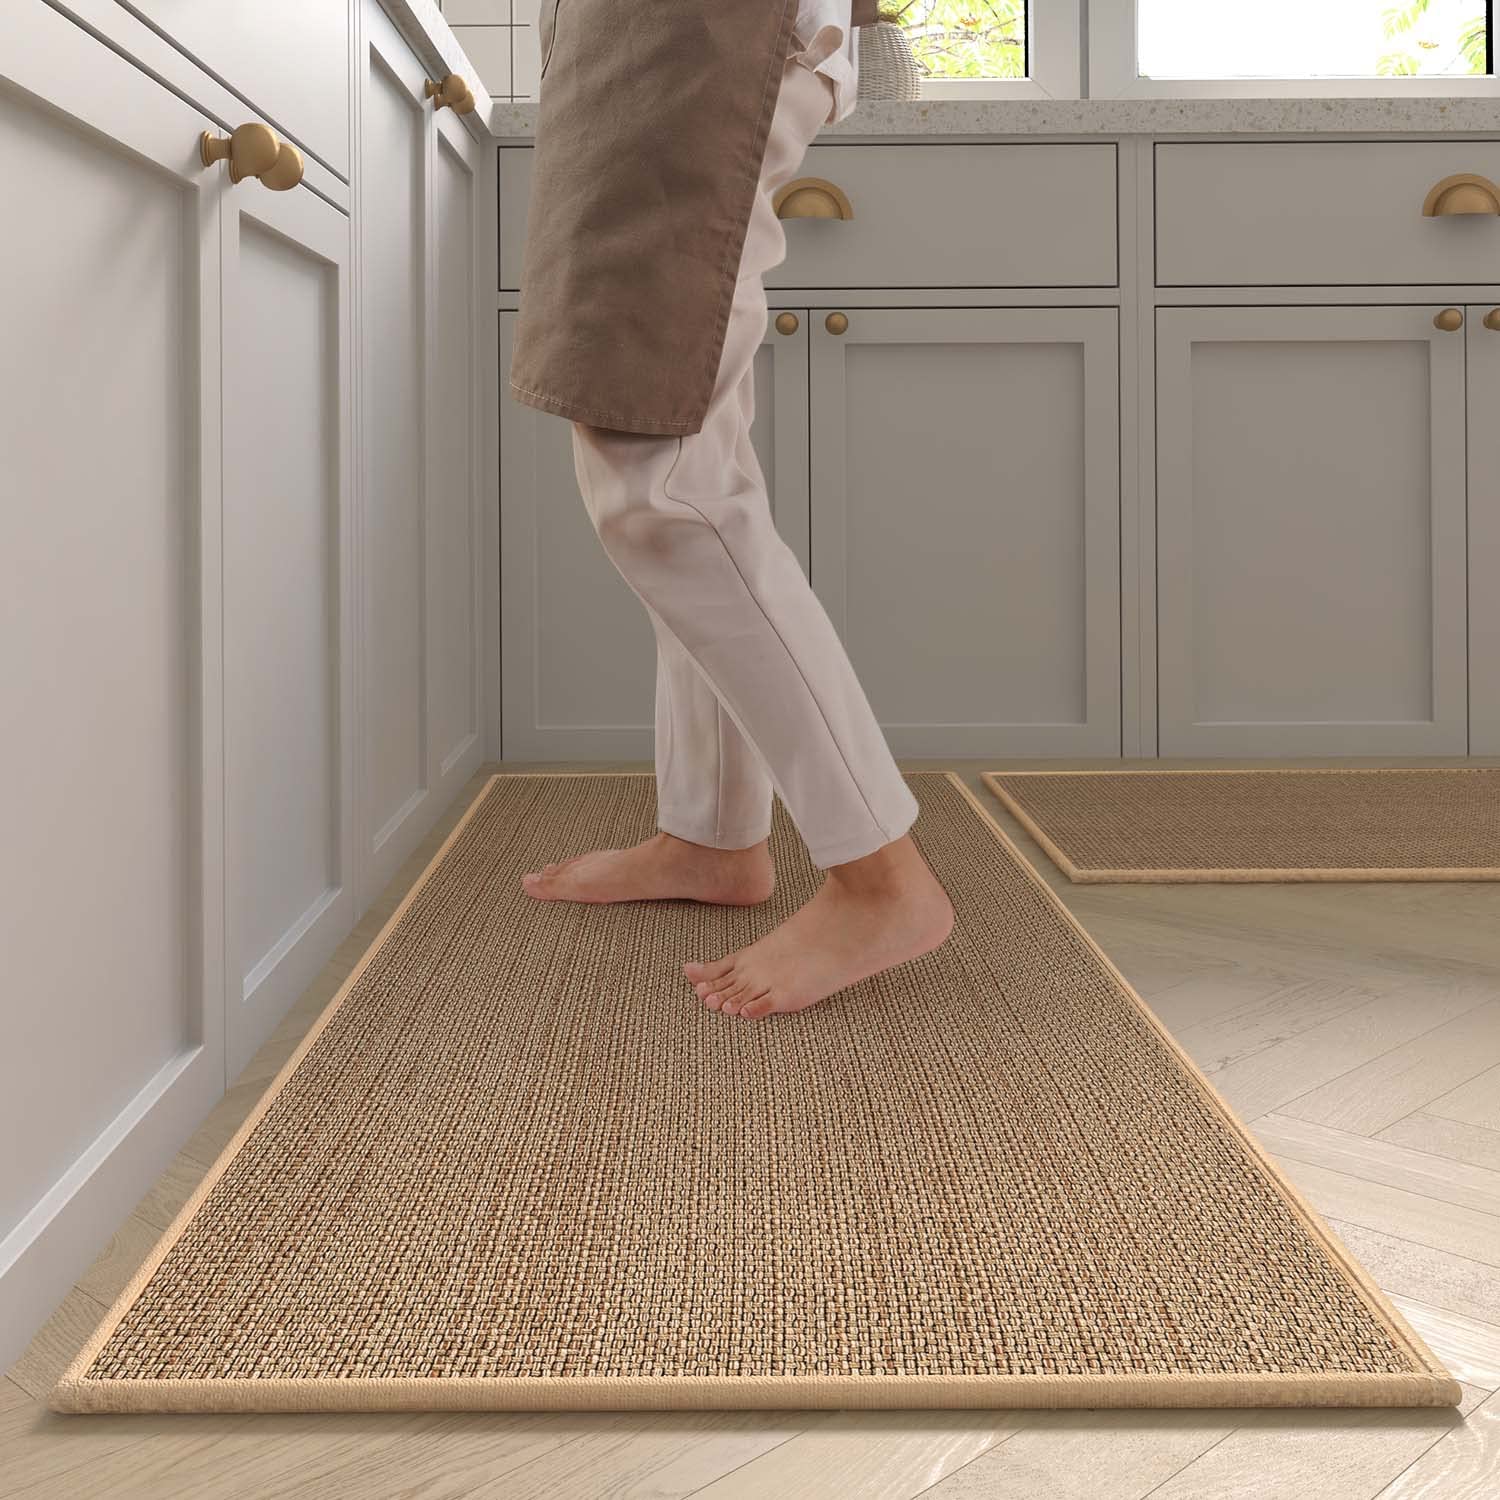 https://www.oldhouseonline.com/oho-html/review/wp-content/uploads/2023/05/montvoo-kitchen-rug-ohj.jpg